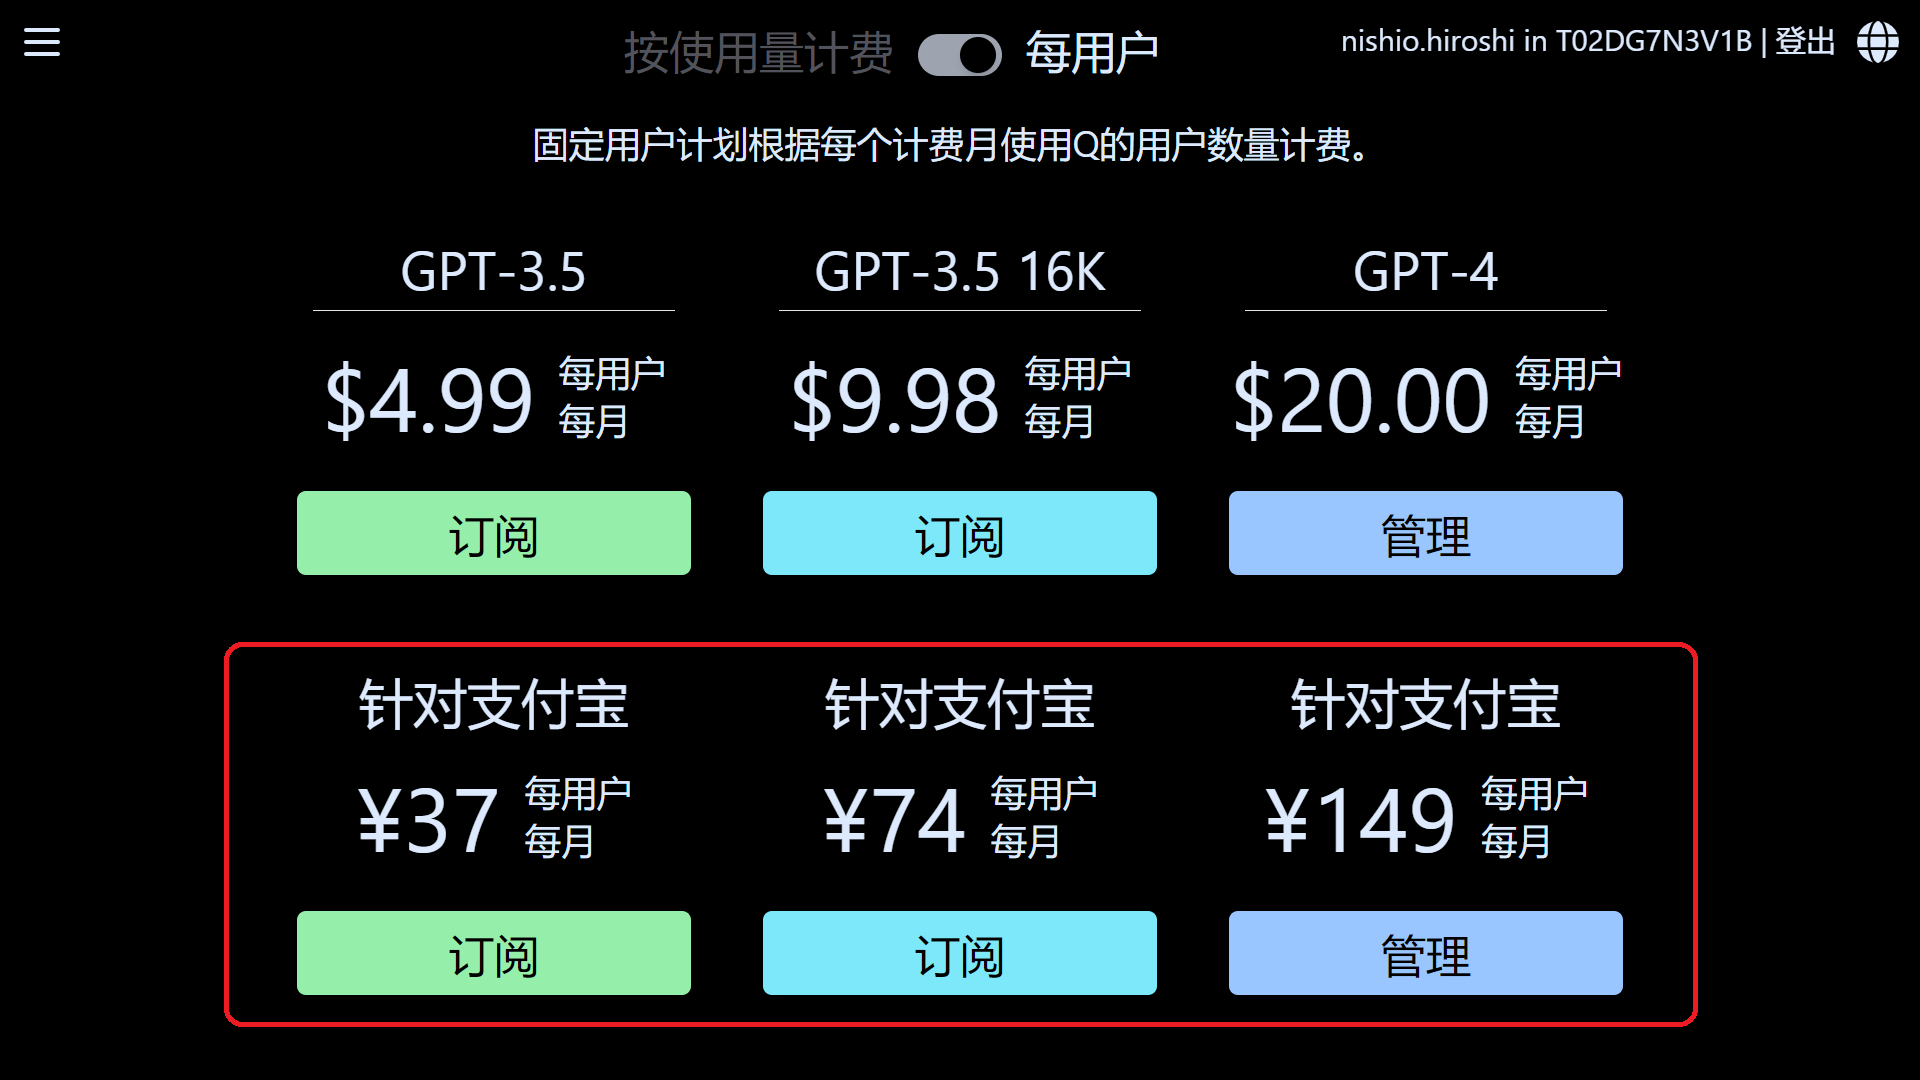 Pricing Page in Simplified Chinese